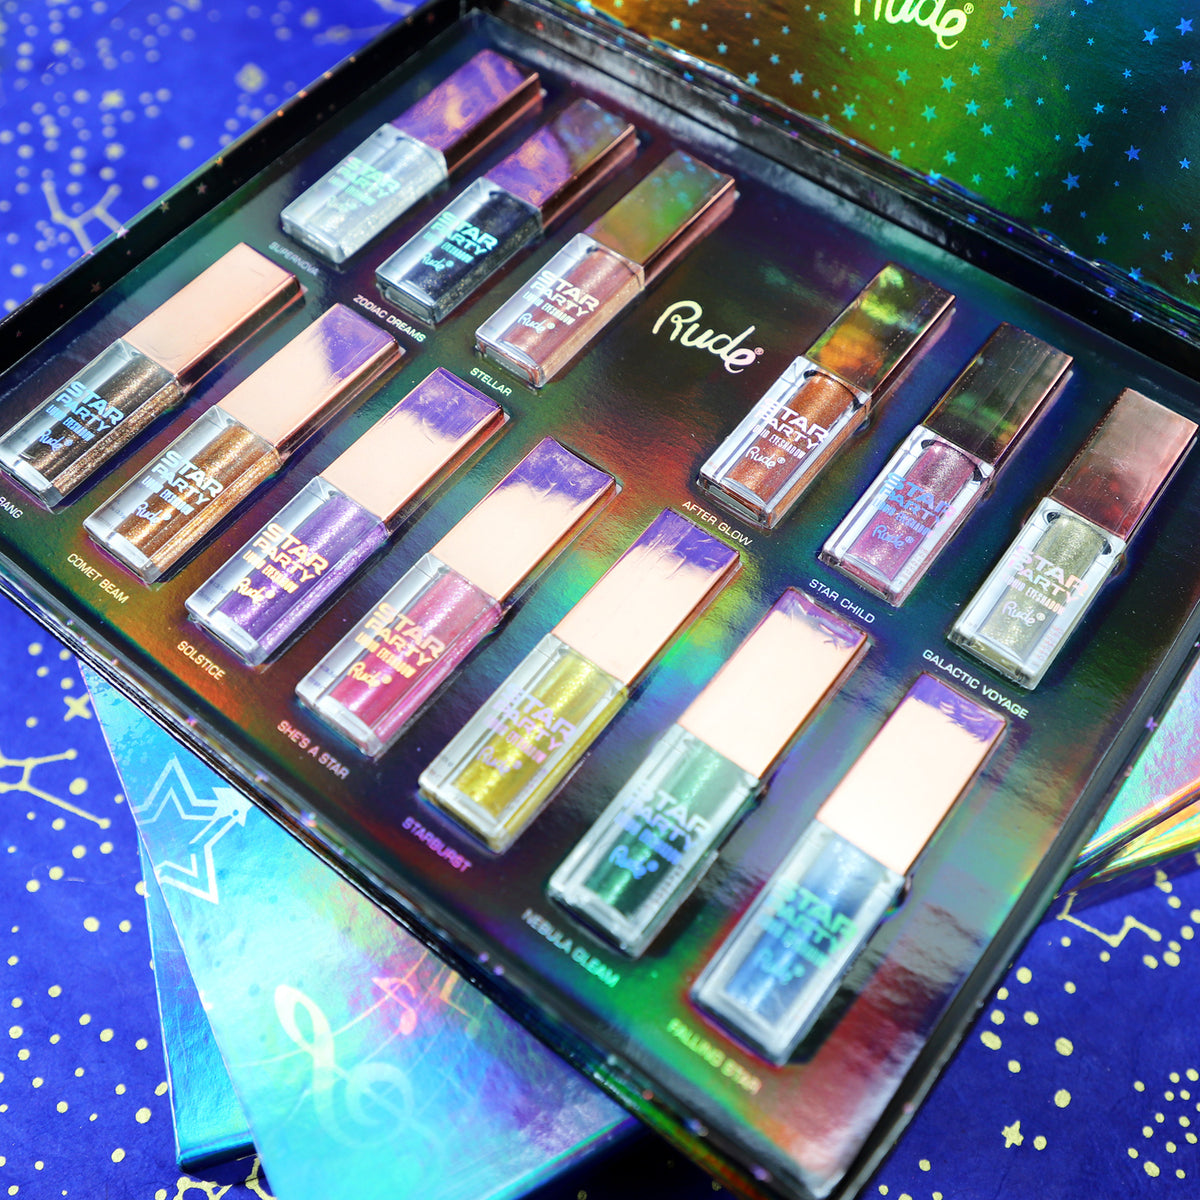 Star Party Liquid Eyeshadow Complete Set (SPECIAL DEAL) Closeup